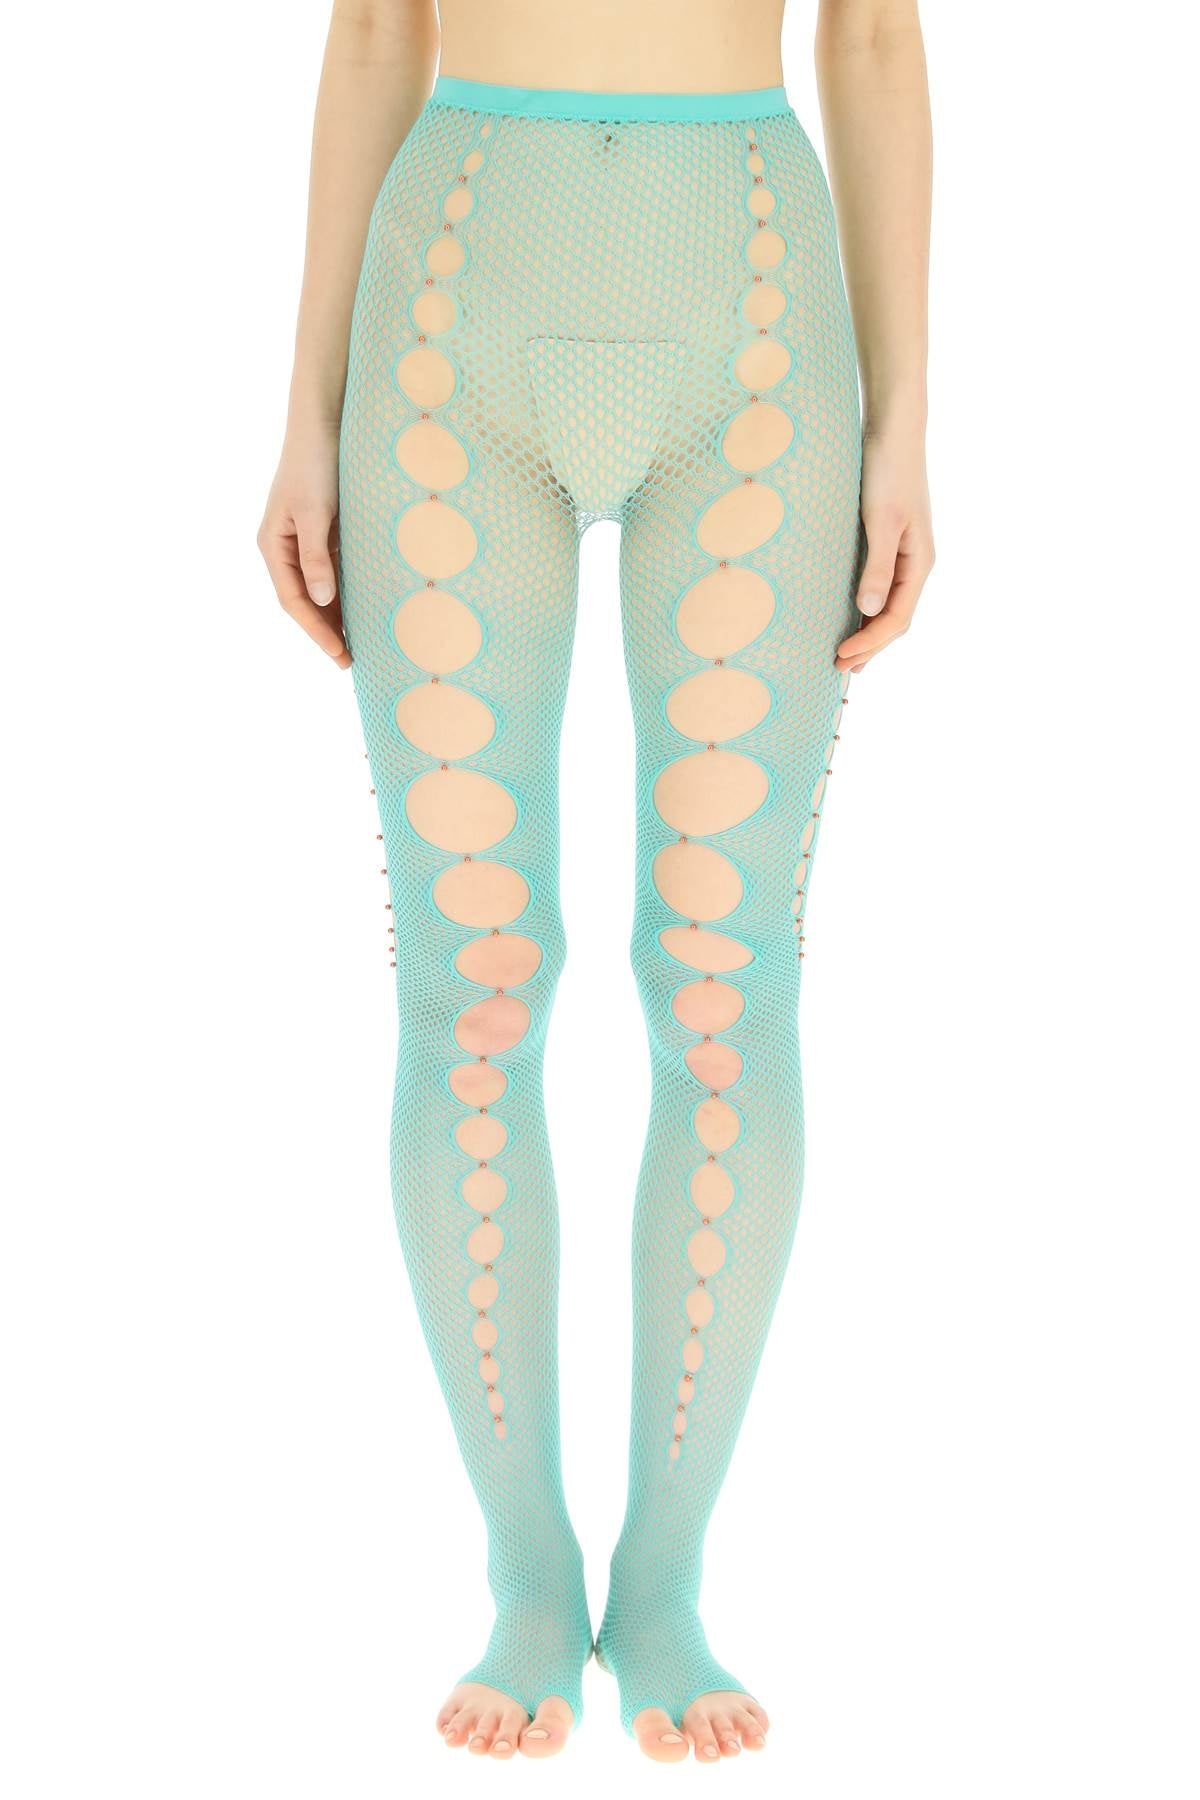 Mesh Stockings With Cut Out And Beads - 1